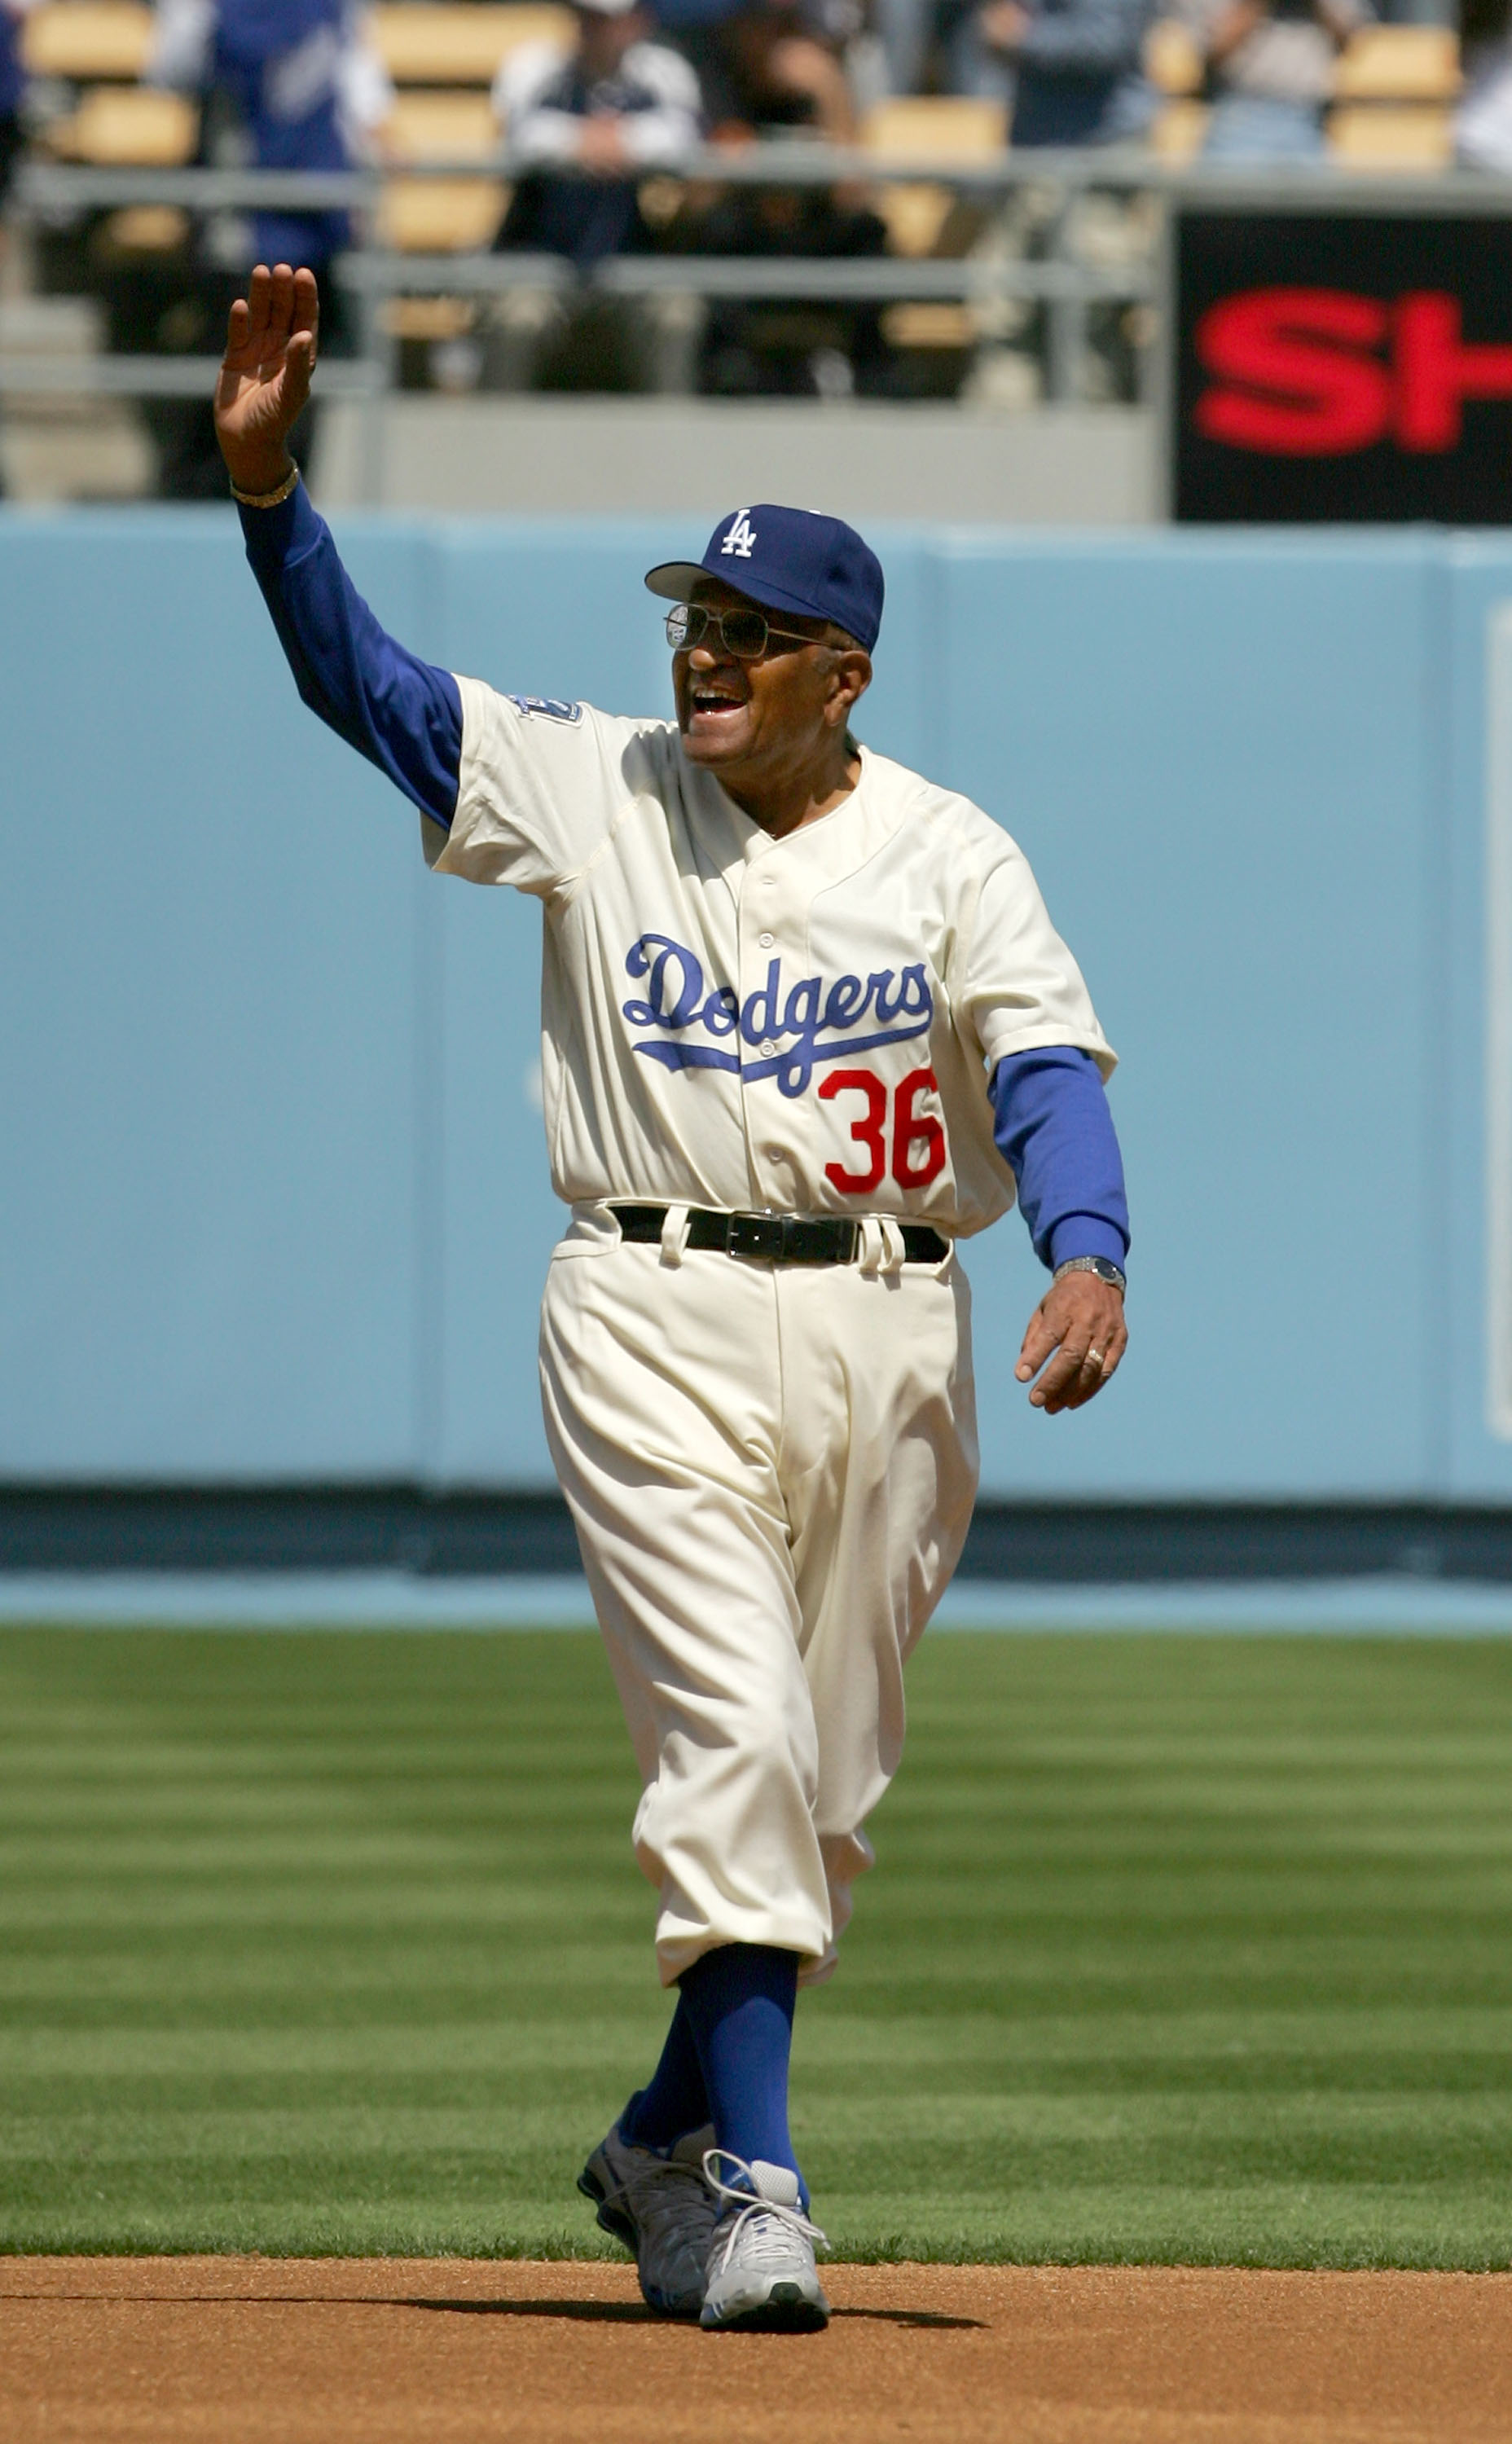 LOS ANGELES, CA - MARCH 31:  Former Dodger Don Newcombe waves to the crowd before the Los Angeles Dodgers Opening Day game against San Francisco Giants at Dodger Stadium on March 31, 2008 in Los Angeles, California.  (Photo by Jeff Gross/Getty Images)